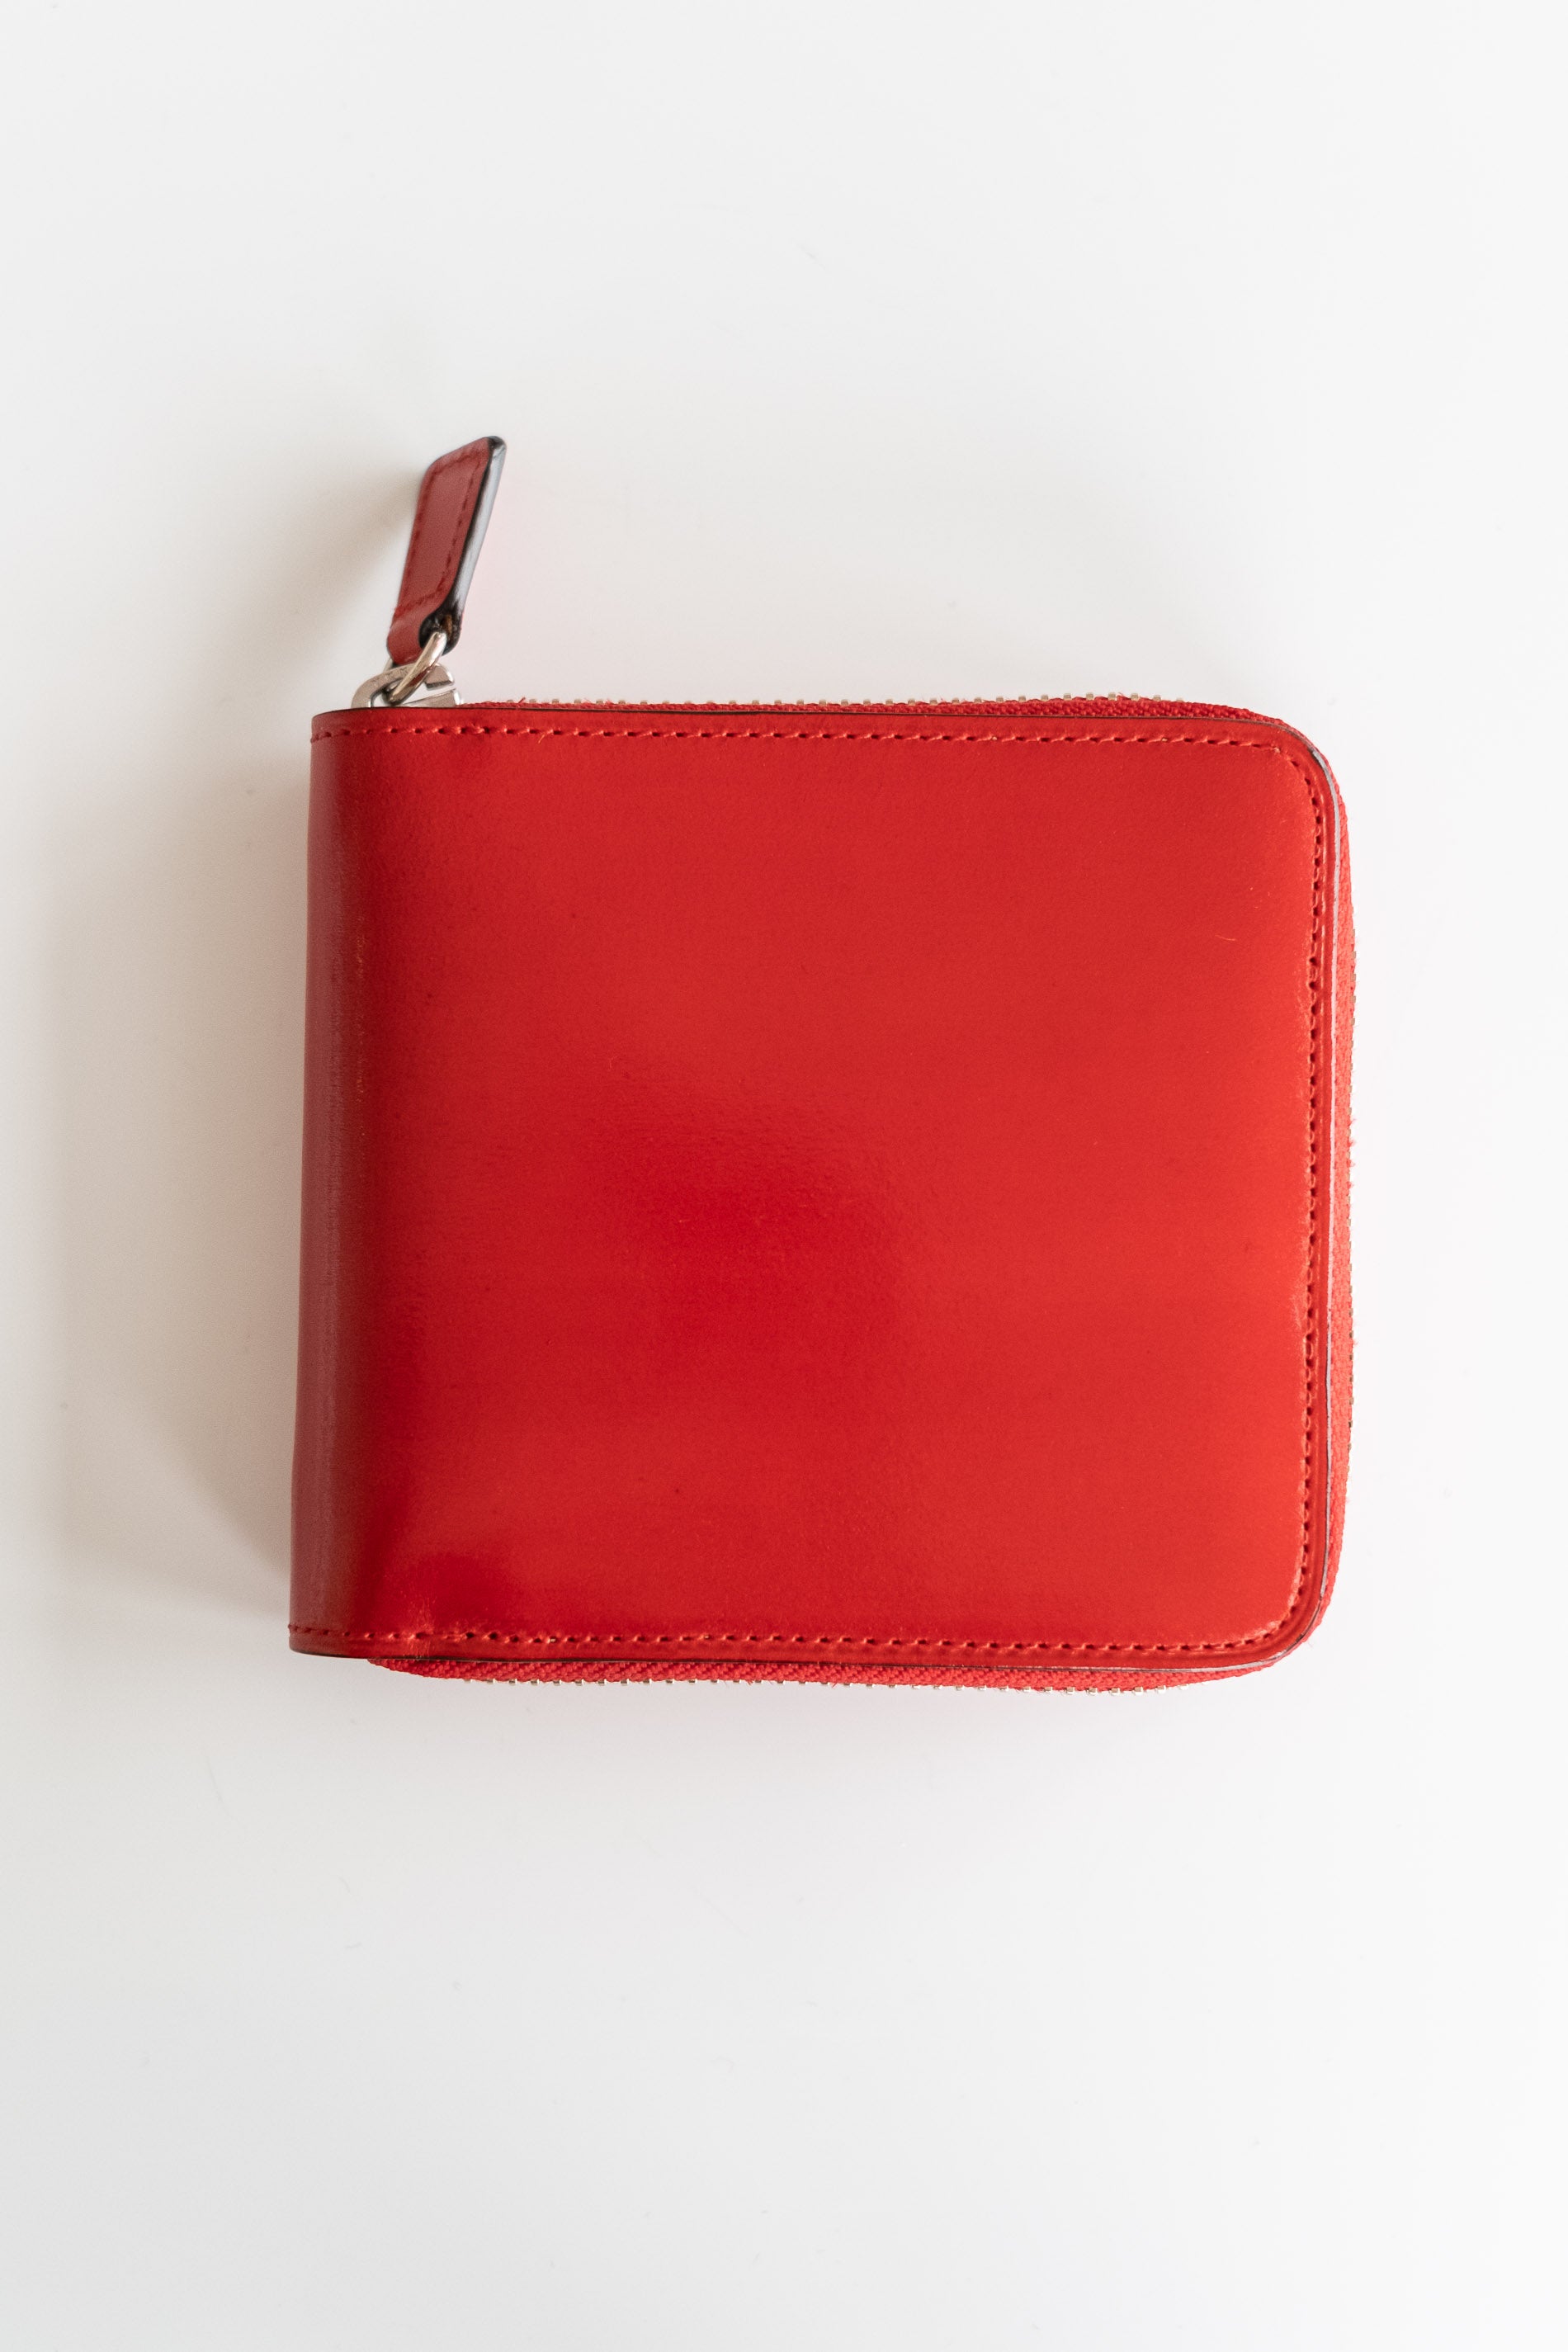 Square Zip Wallet by Il Bussetto – Il Bussetto Official